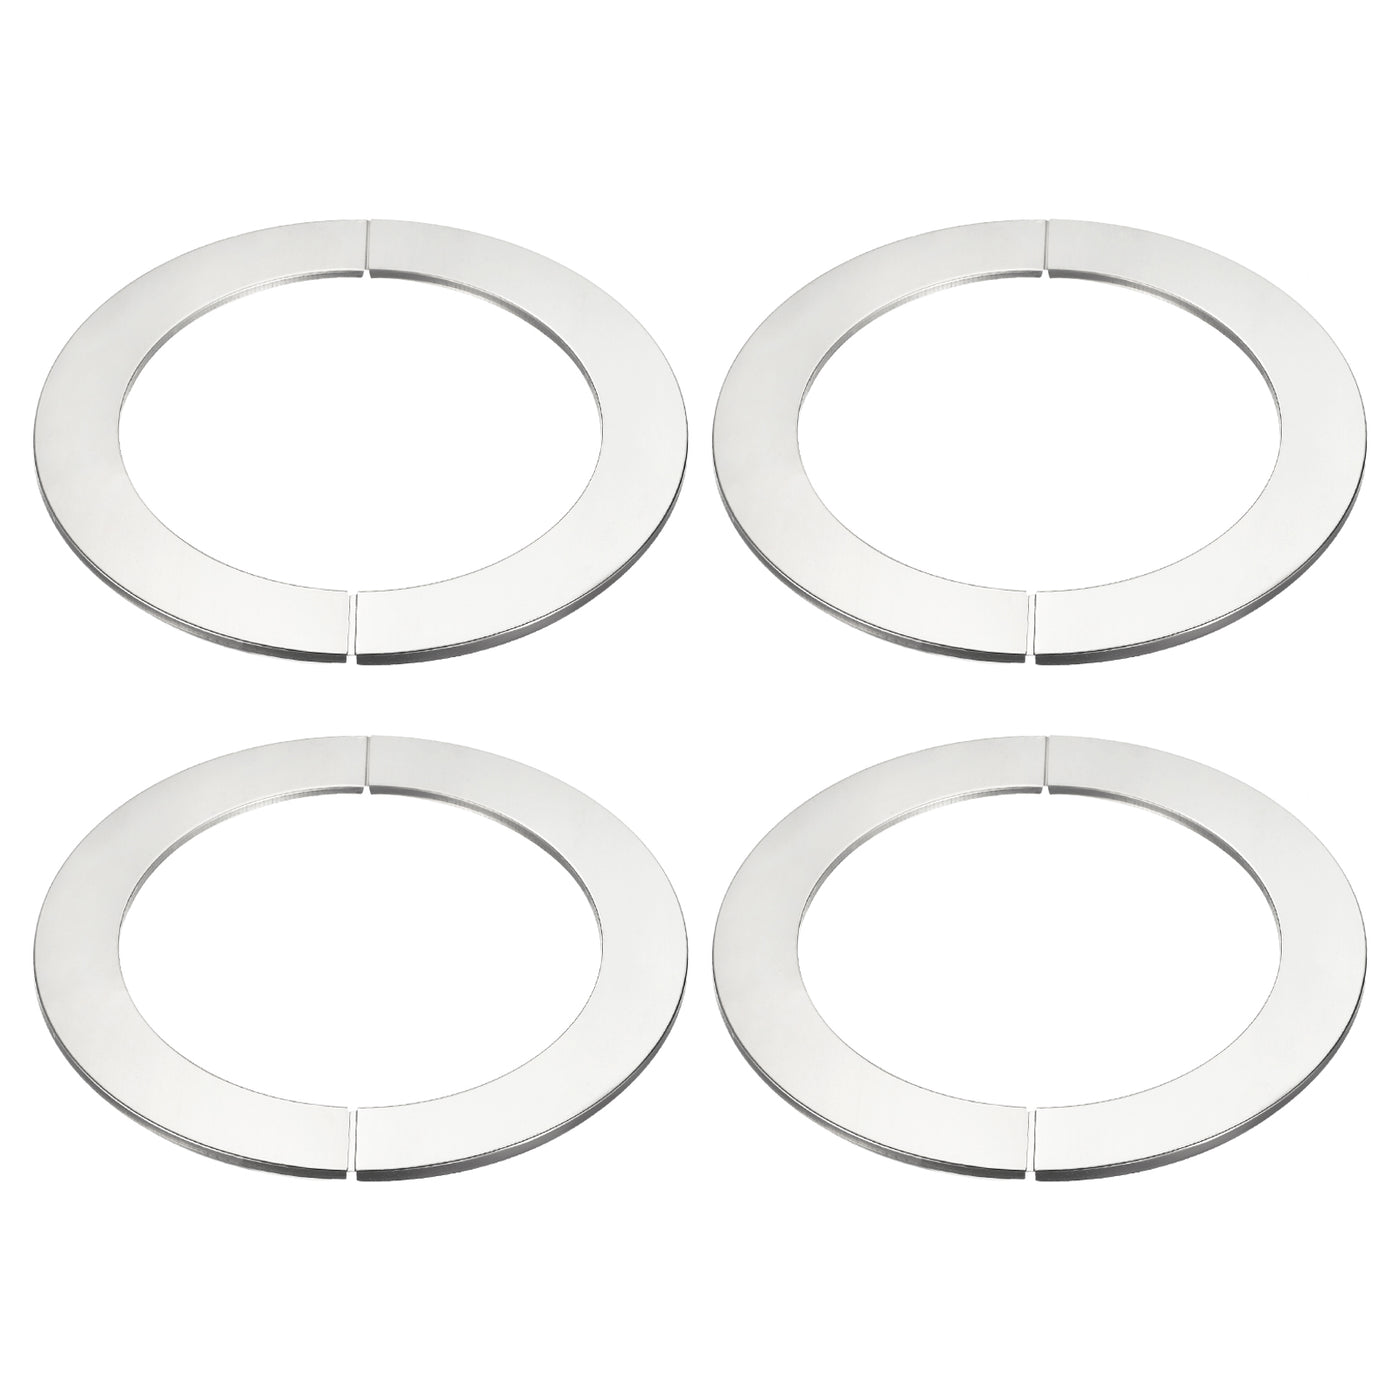 Uxcell Uxcell Wall Split Flange, 201 Stainless Steel Round Escutcheon Plate for 181mm Diameter Pipe 4Pcs